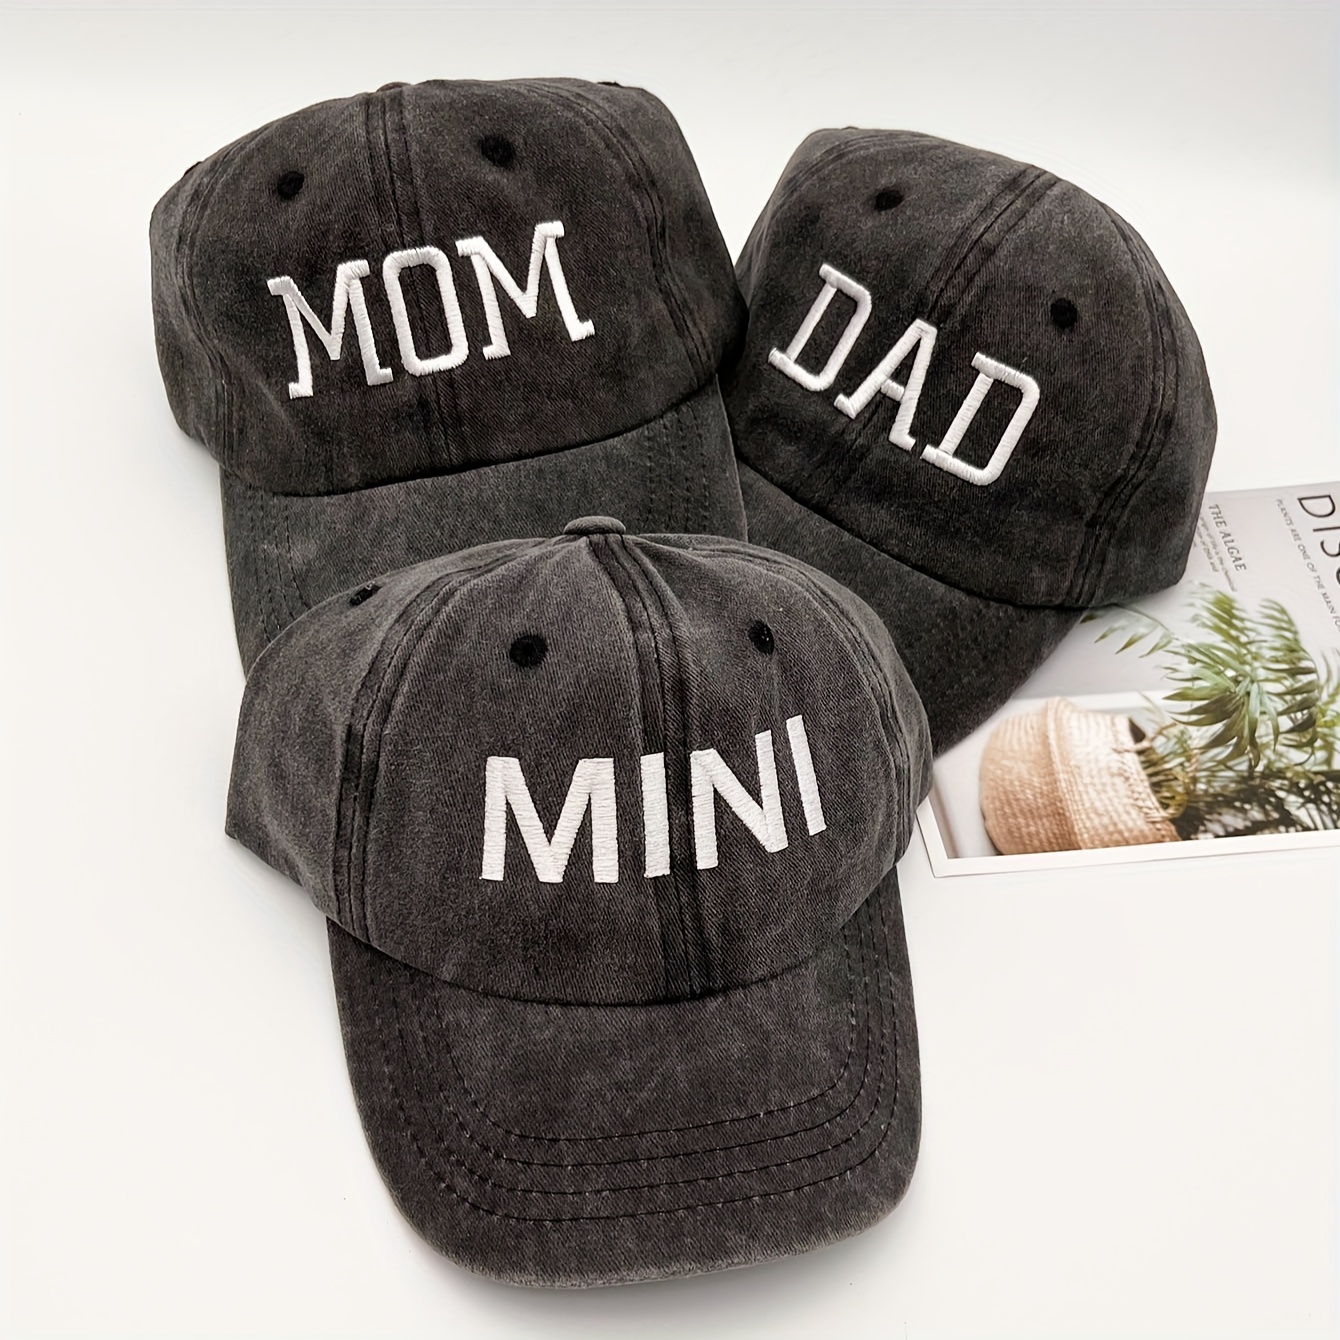 

1/3pcs Mini Mom Dad Embroidery Baseball Caps Solid Color Washed Distressed Dad Hats Parent-child Style Outdoor Sports Hats For Women Men